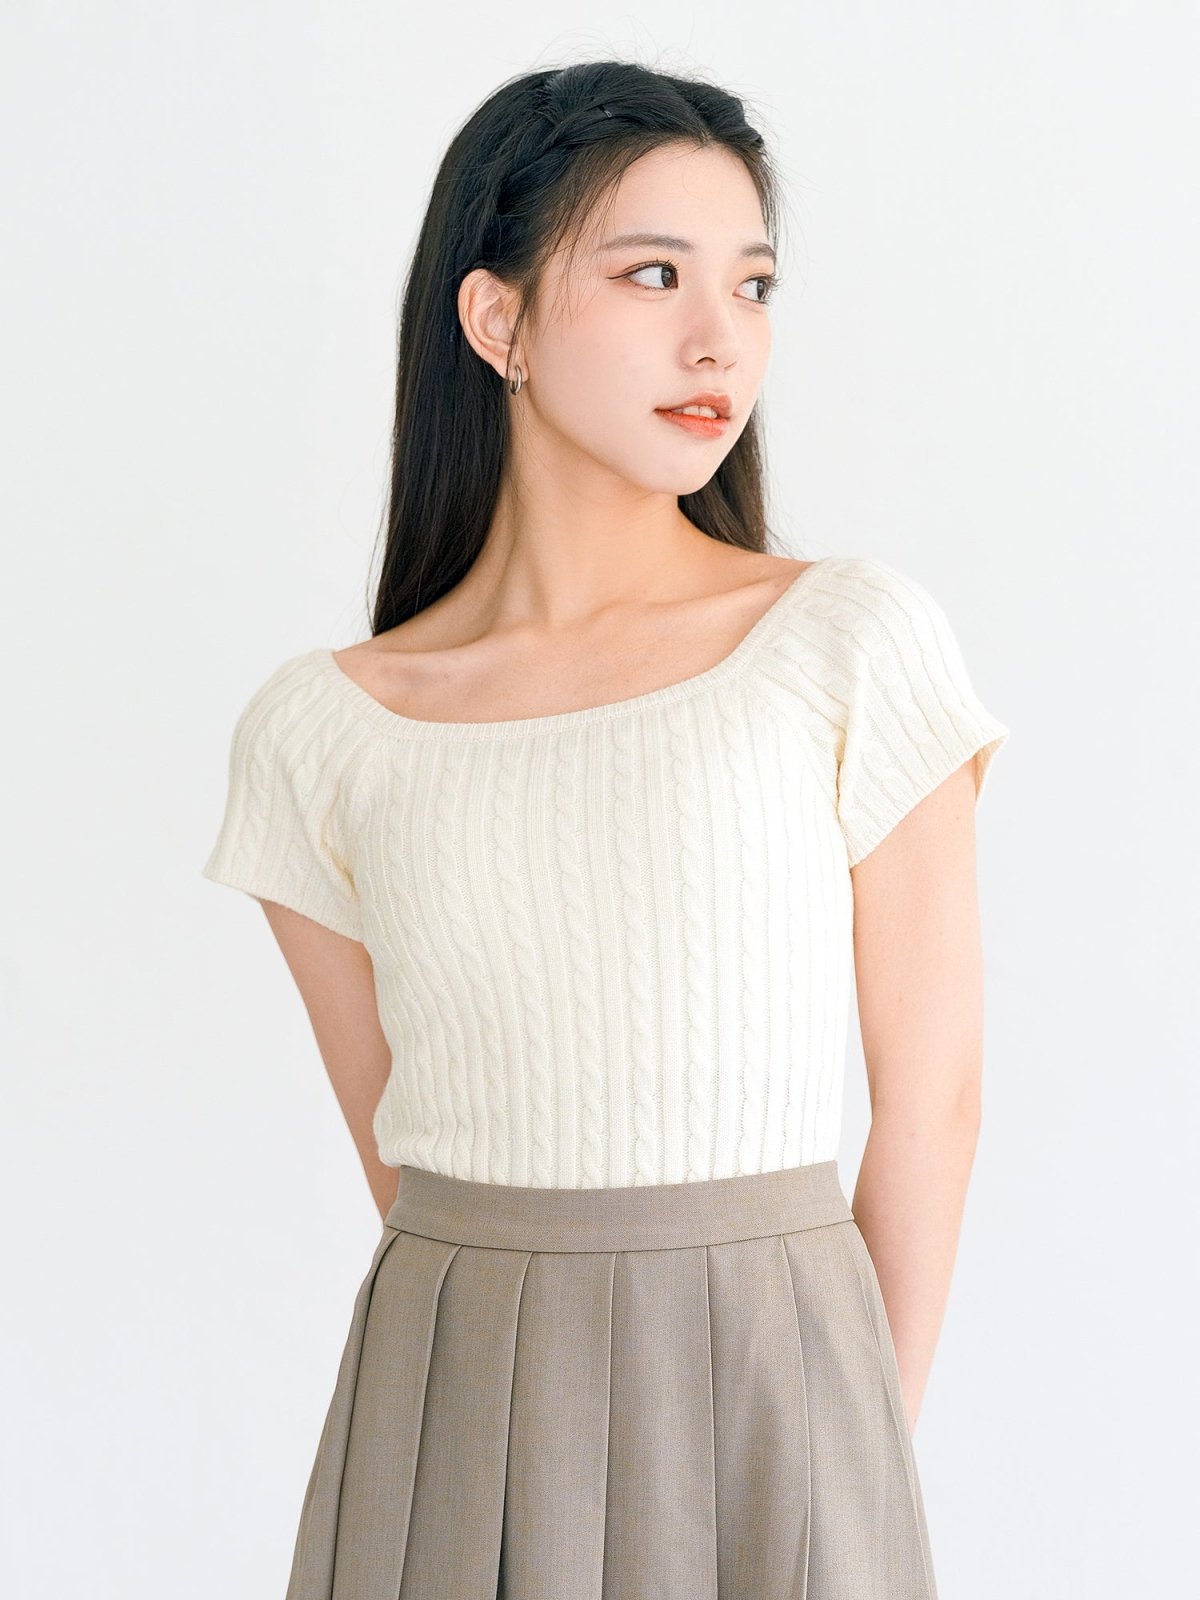 Snow Cable Knit Short Sleeve Top - DAG-G-220160IVORYF - Mochi Ivory - F - D'ZAGE Designs